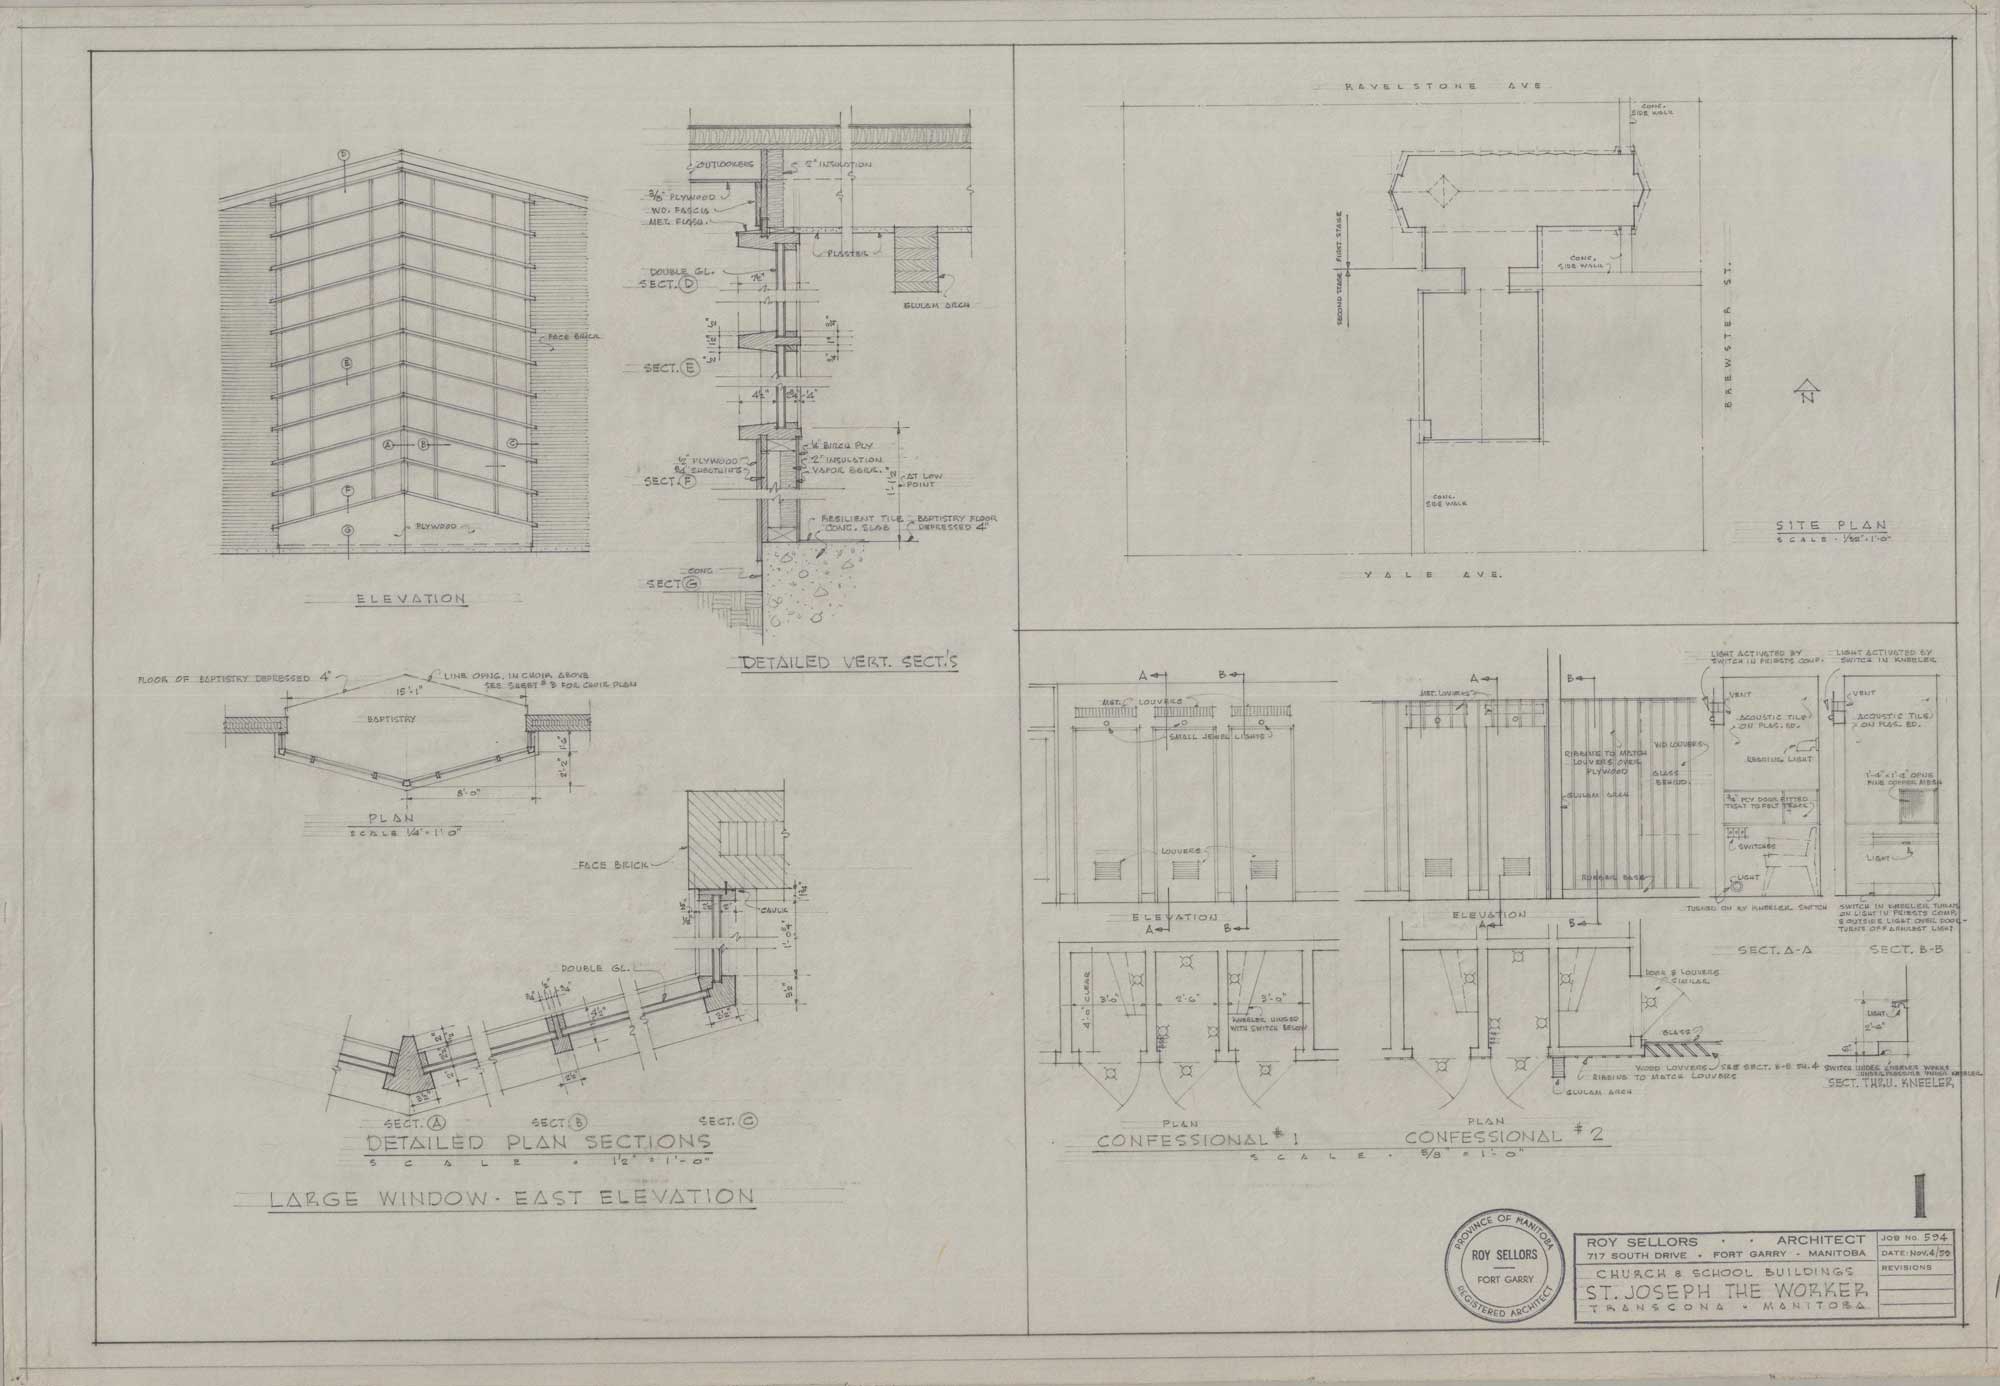 Image shows detailed drawings of east elevation, site plan, and confessional for St. Joseph the Worker.